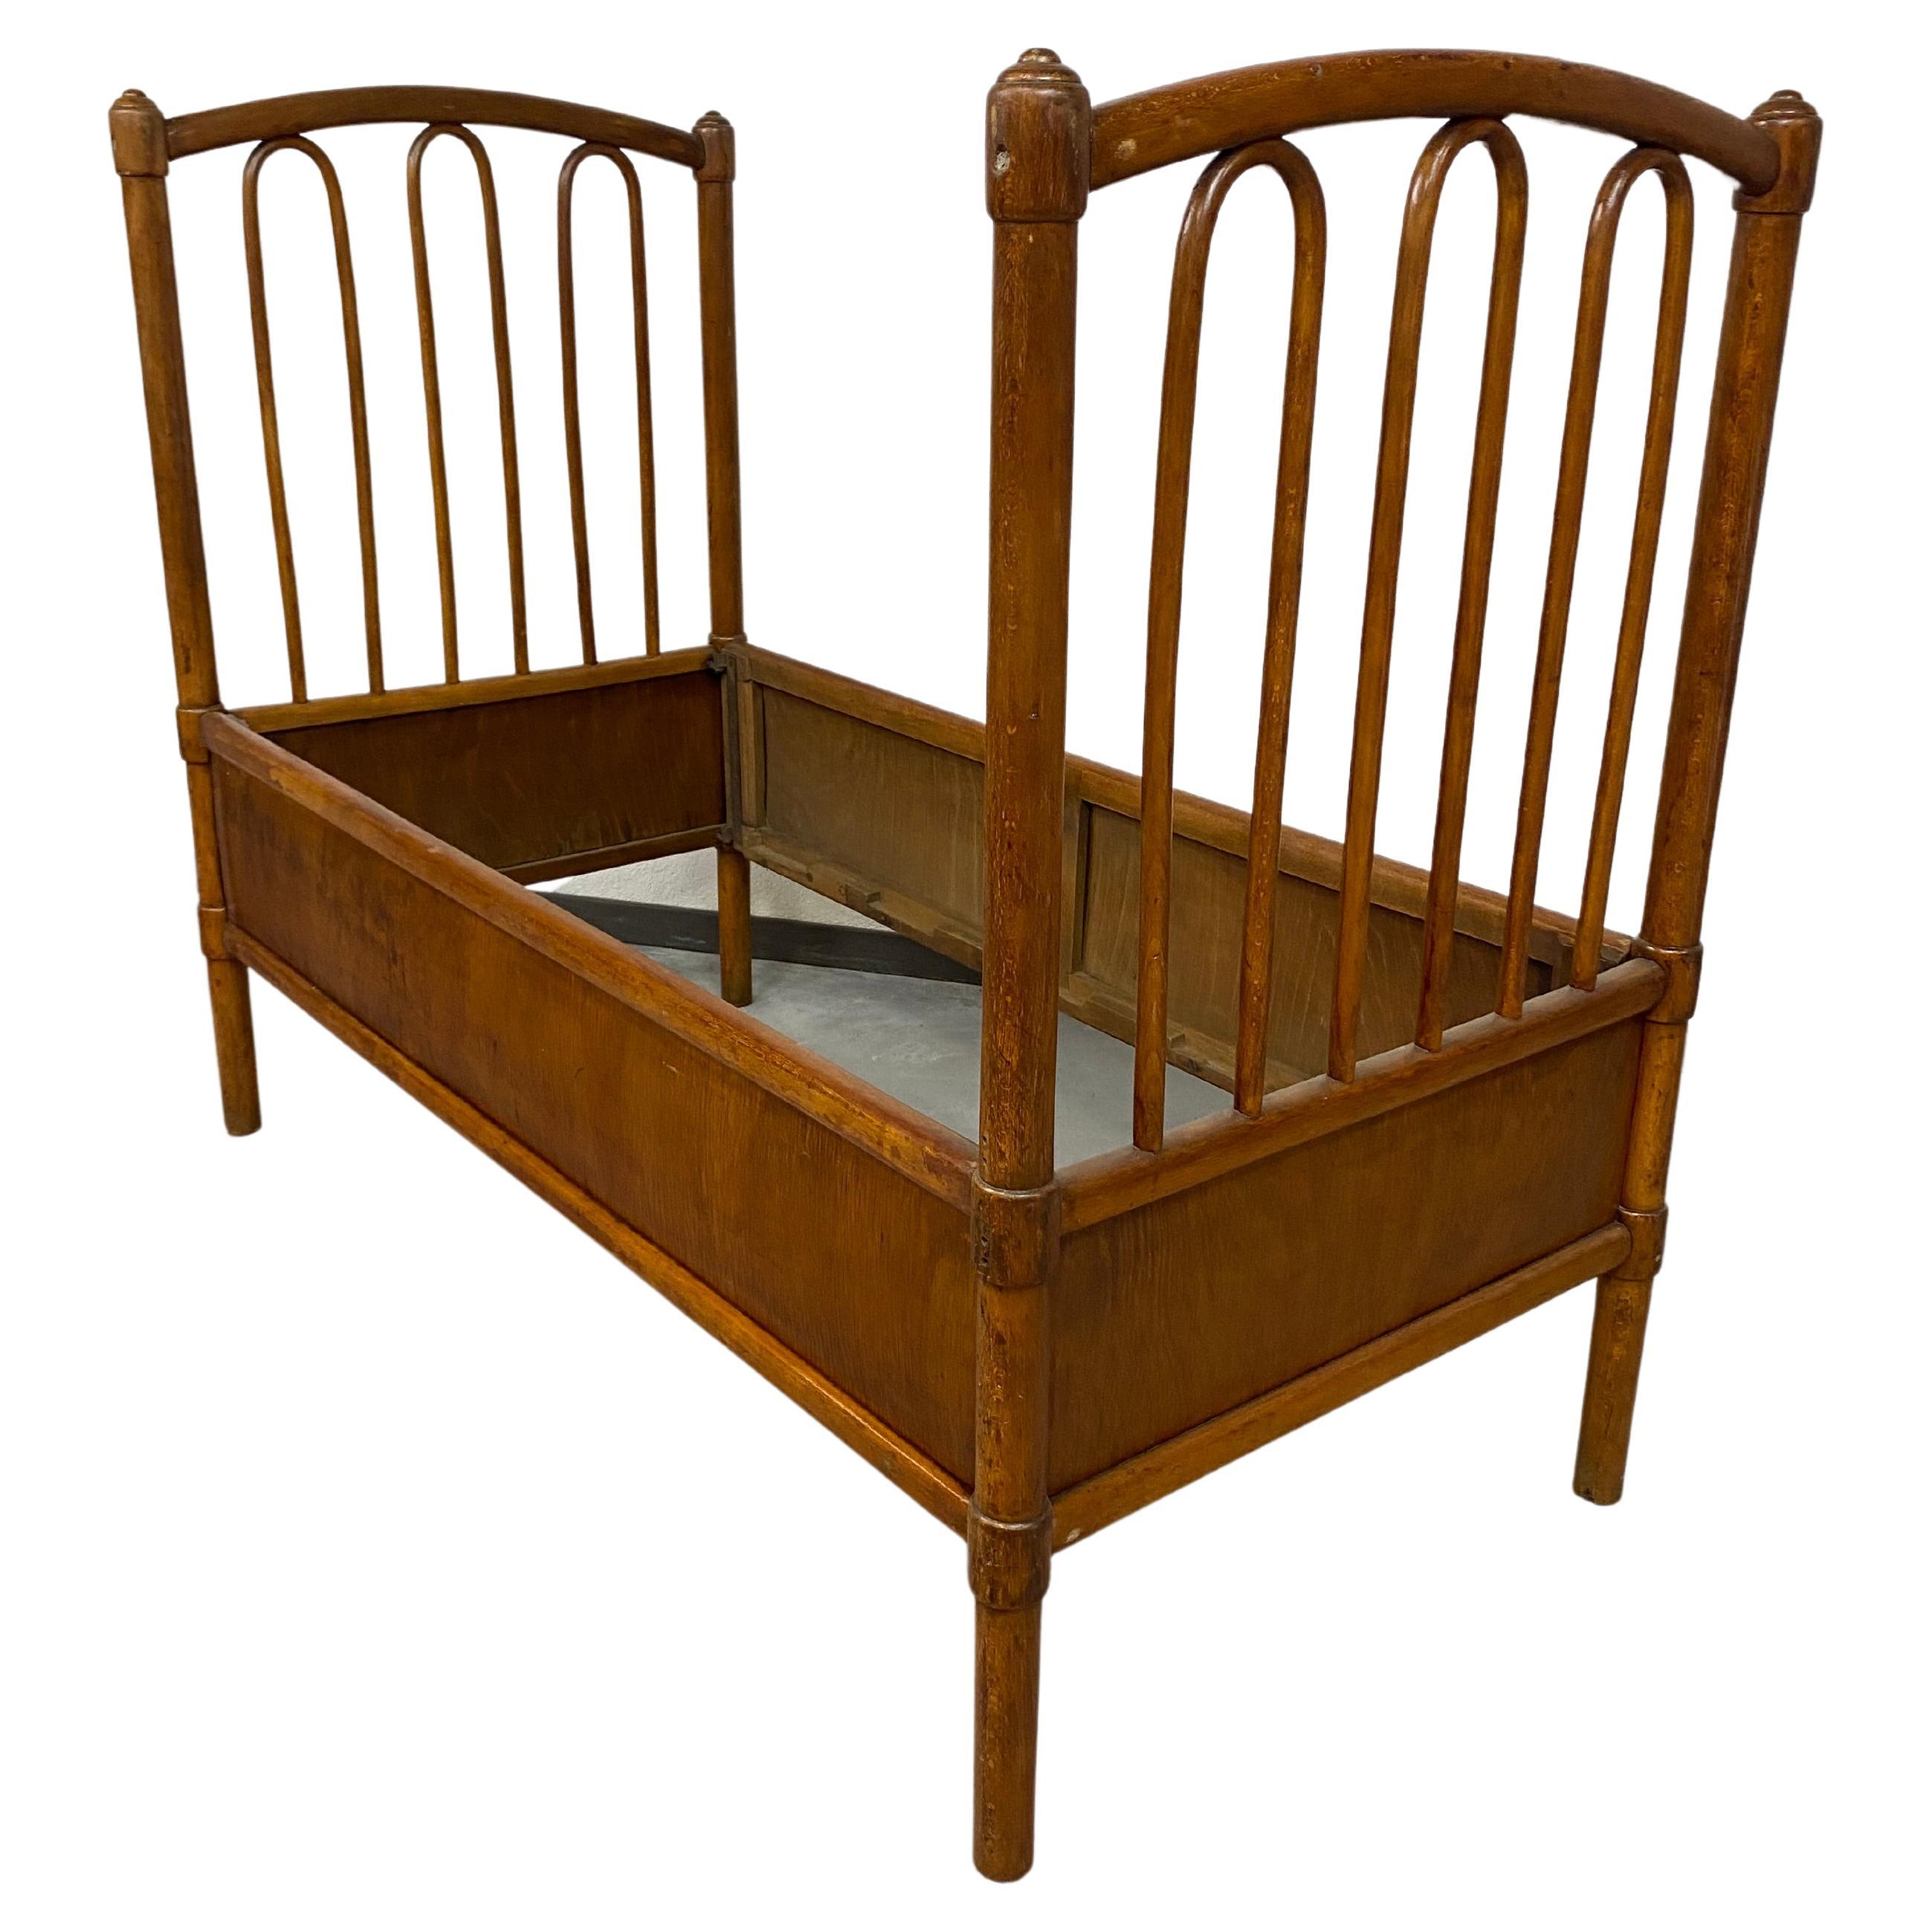 Thonet bed no.5 for a child